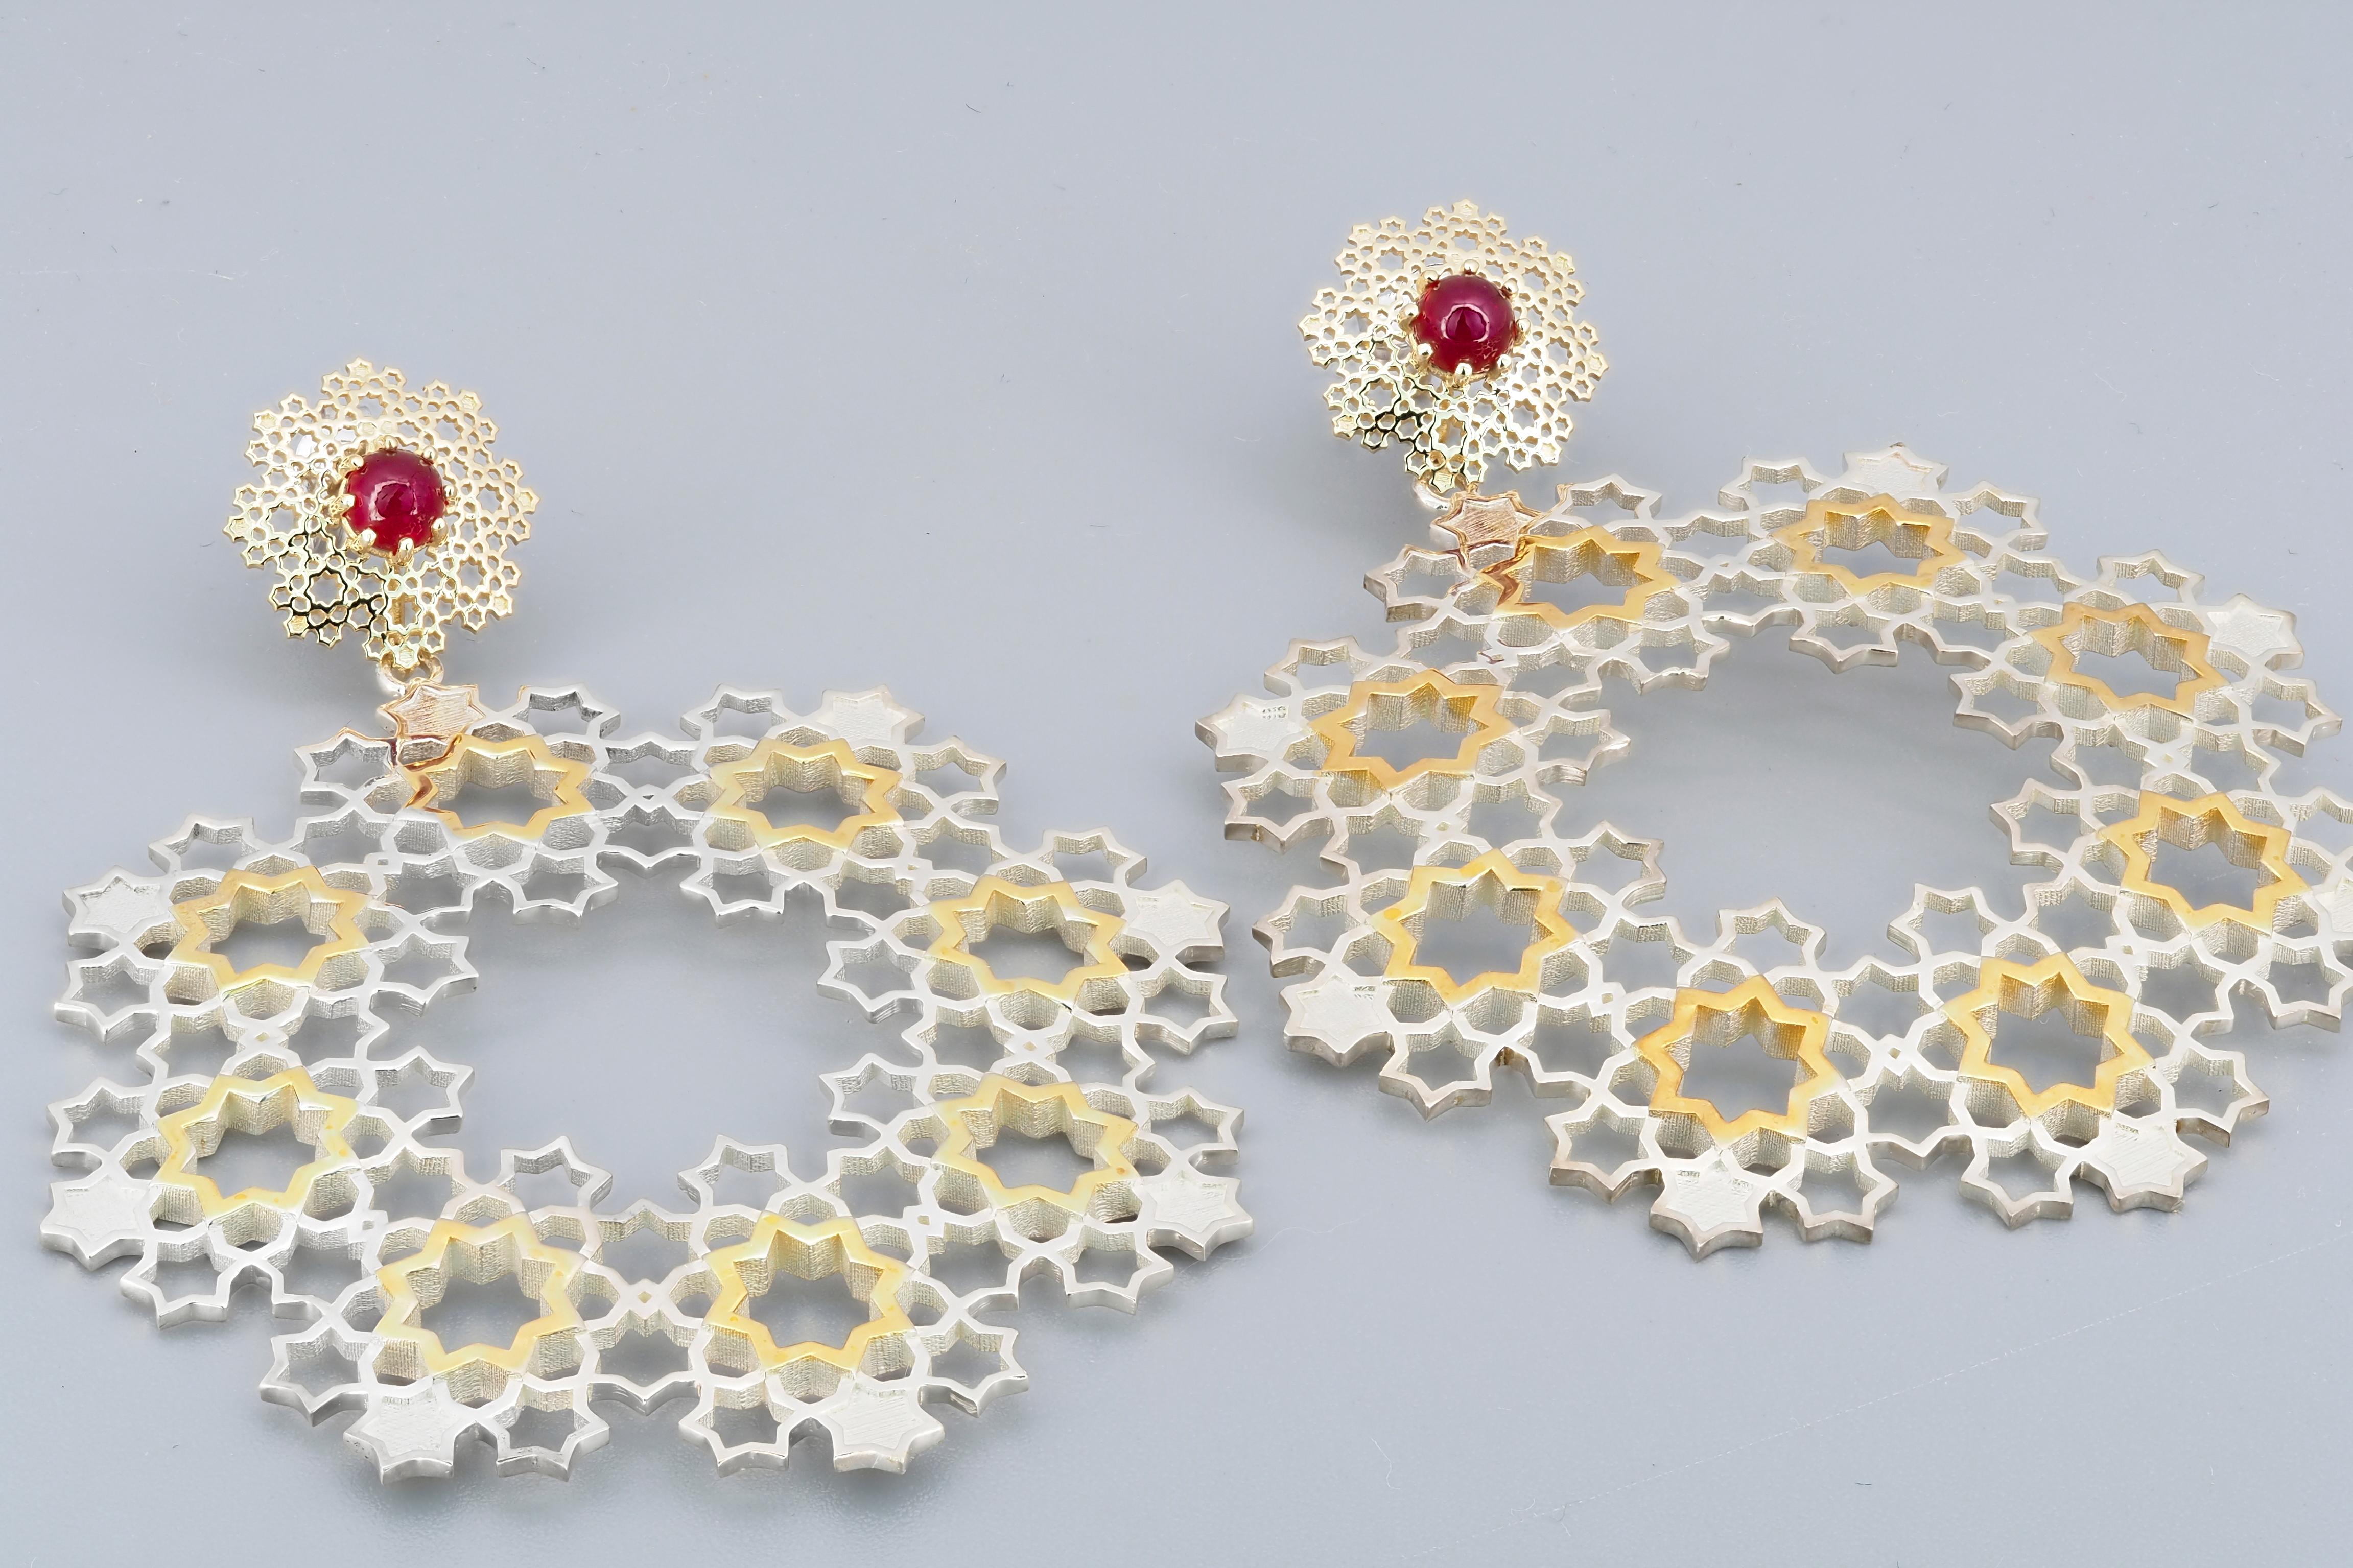 Solid Gold and Silver transformable earrings studs with earrings with natural rubies. Different type wearing massive earrings with natural rubies - lower part removable. You can wear earring in different ways: as studs (for everyday wear ring) and